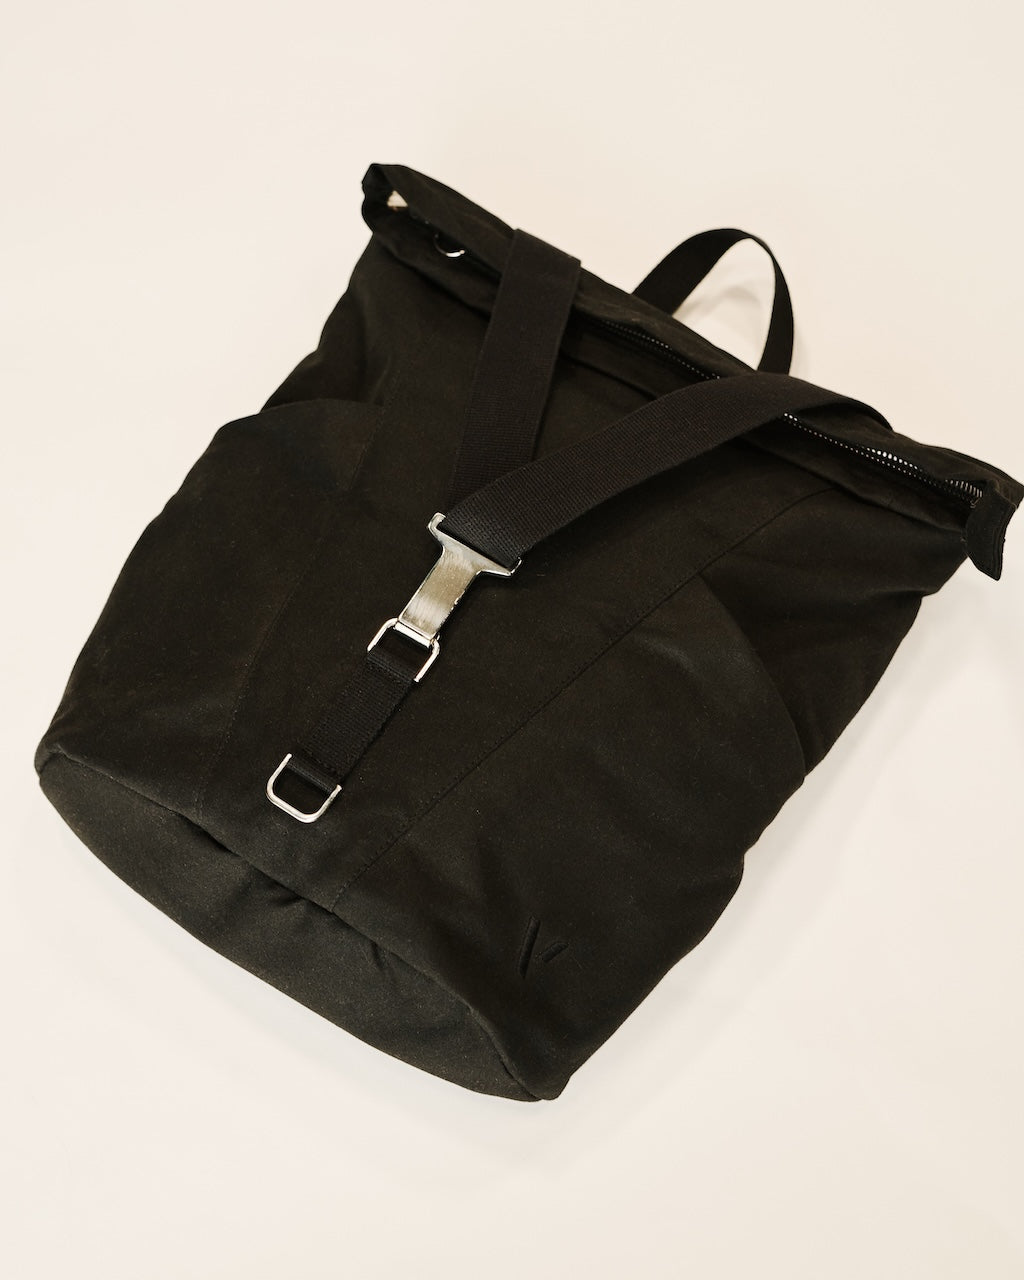 Product picture of 001 Bike Bag